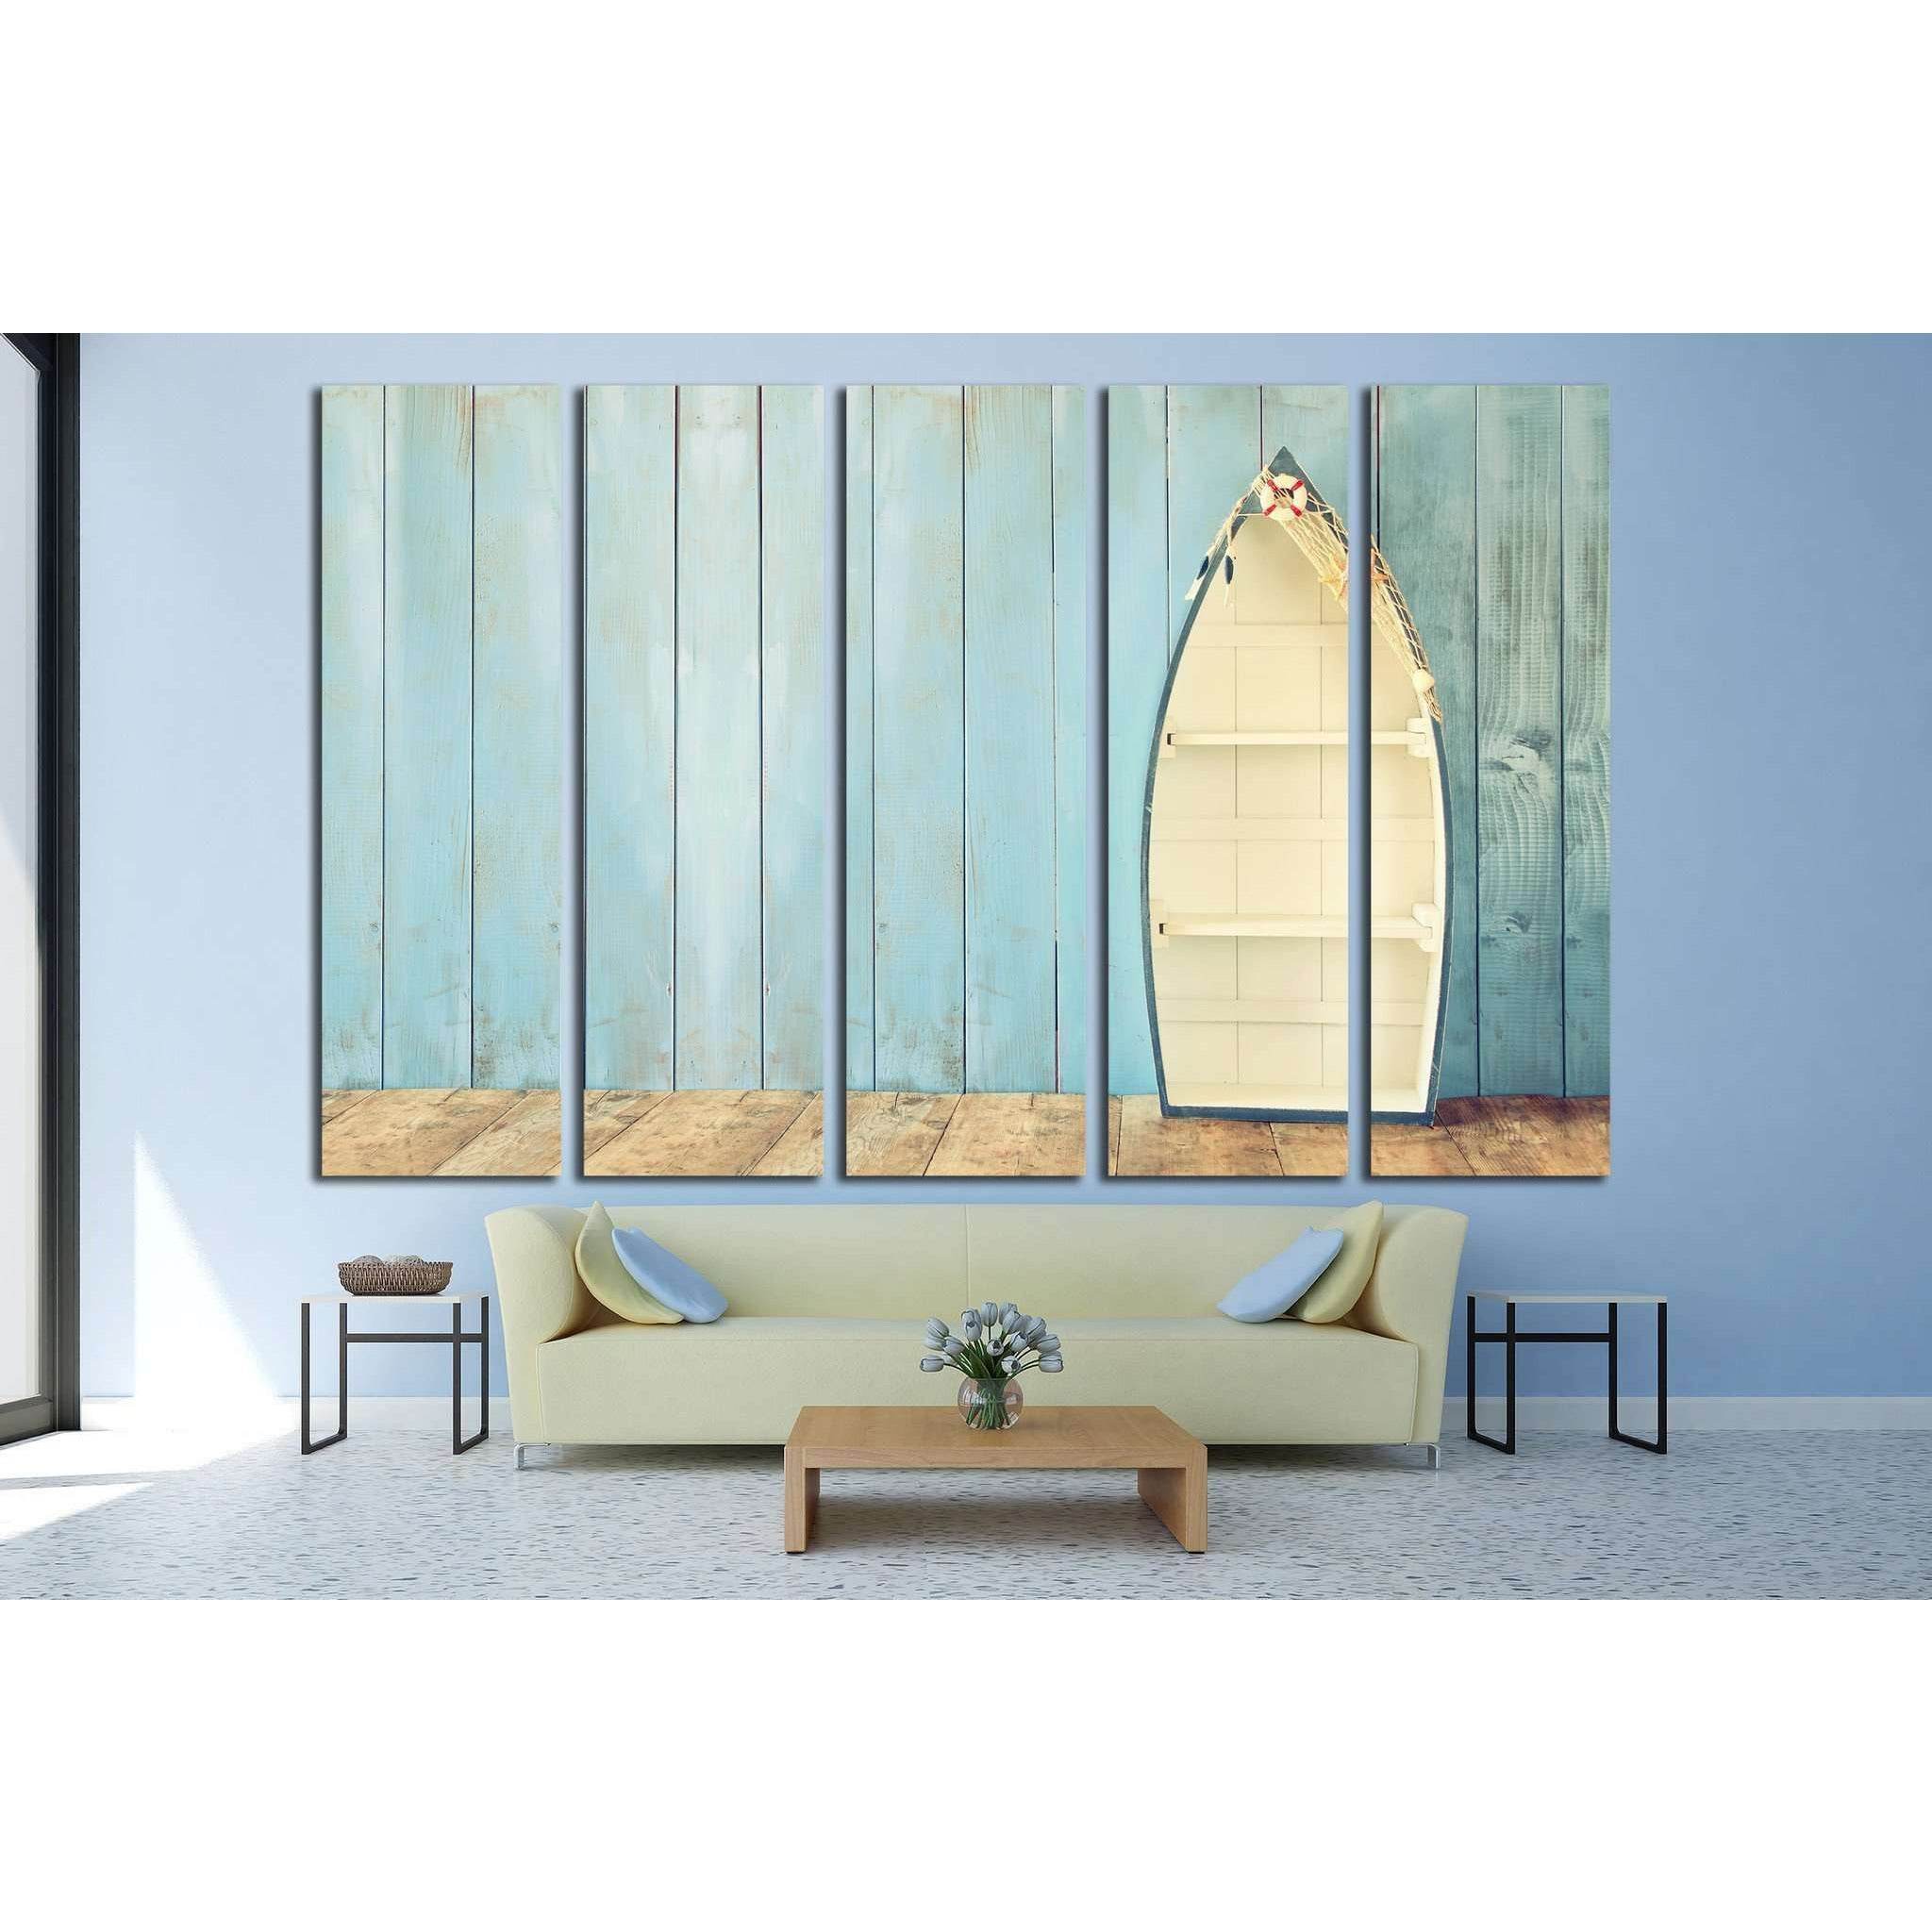 nautical boat shape shelves on wooden table №1403 Ready to Hang Canvas Print